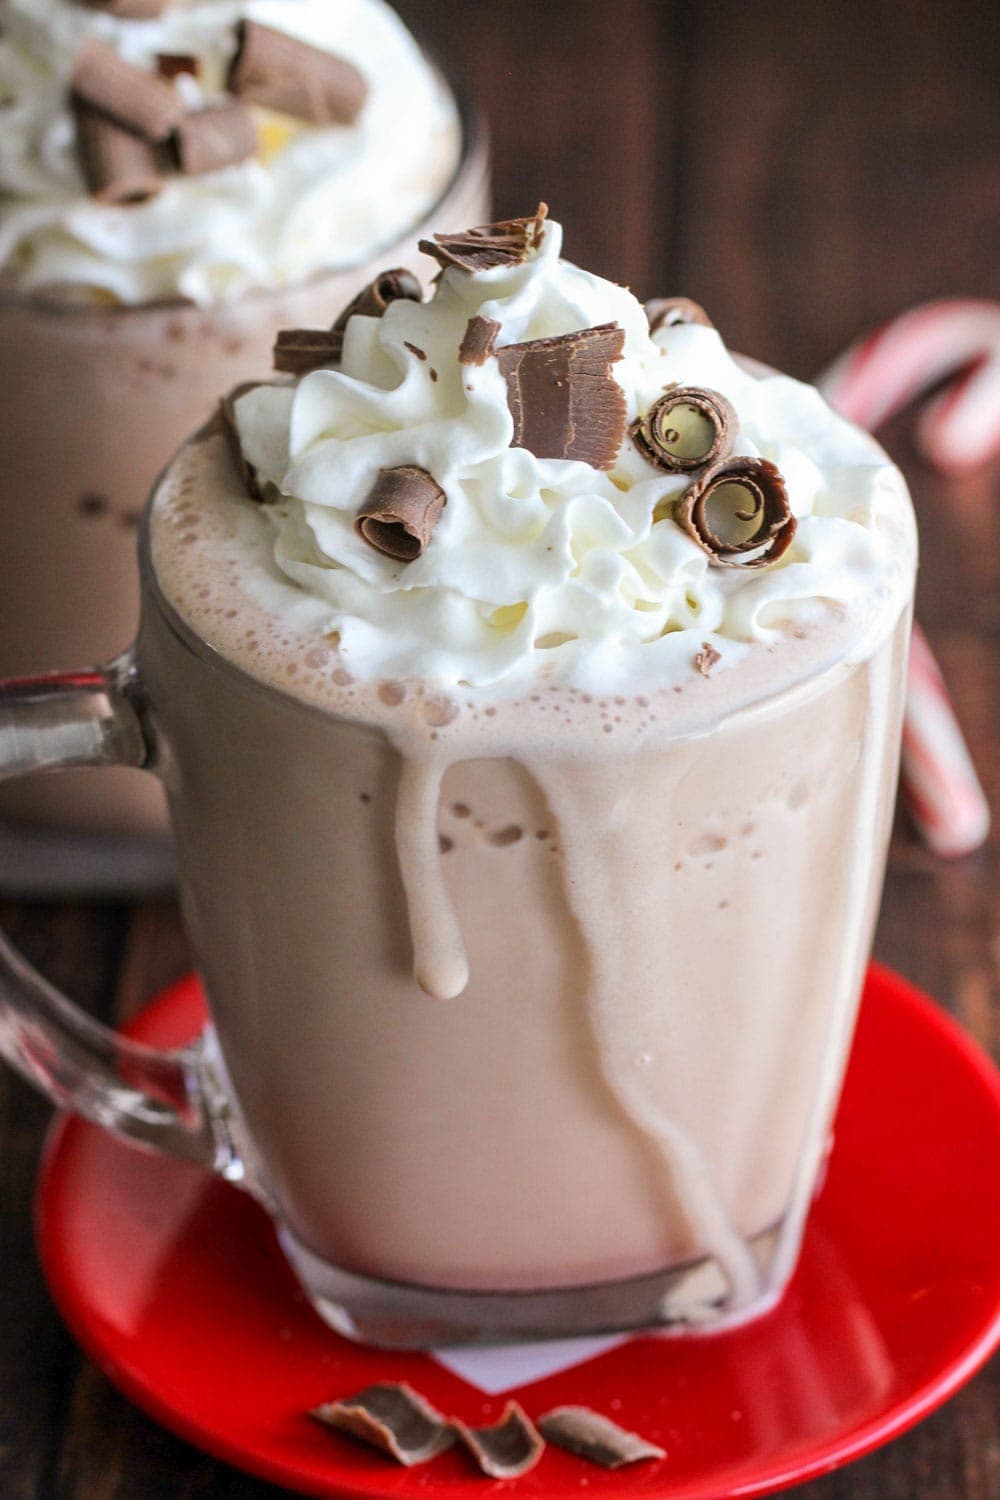 Holiday drink ideas - frozen hot chocolate topped with whipped cream and chocolate shavings.